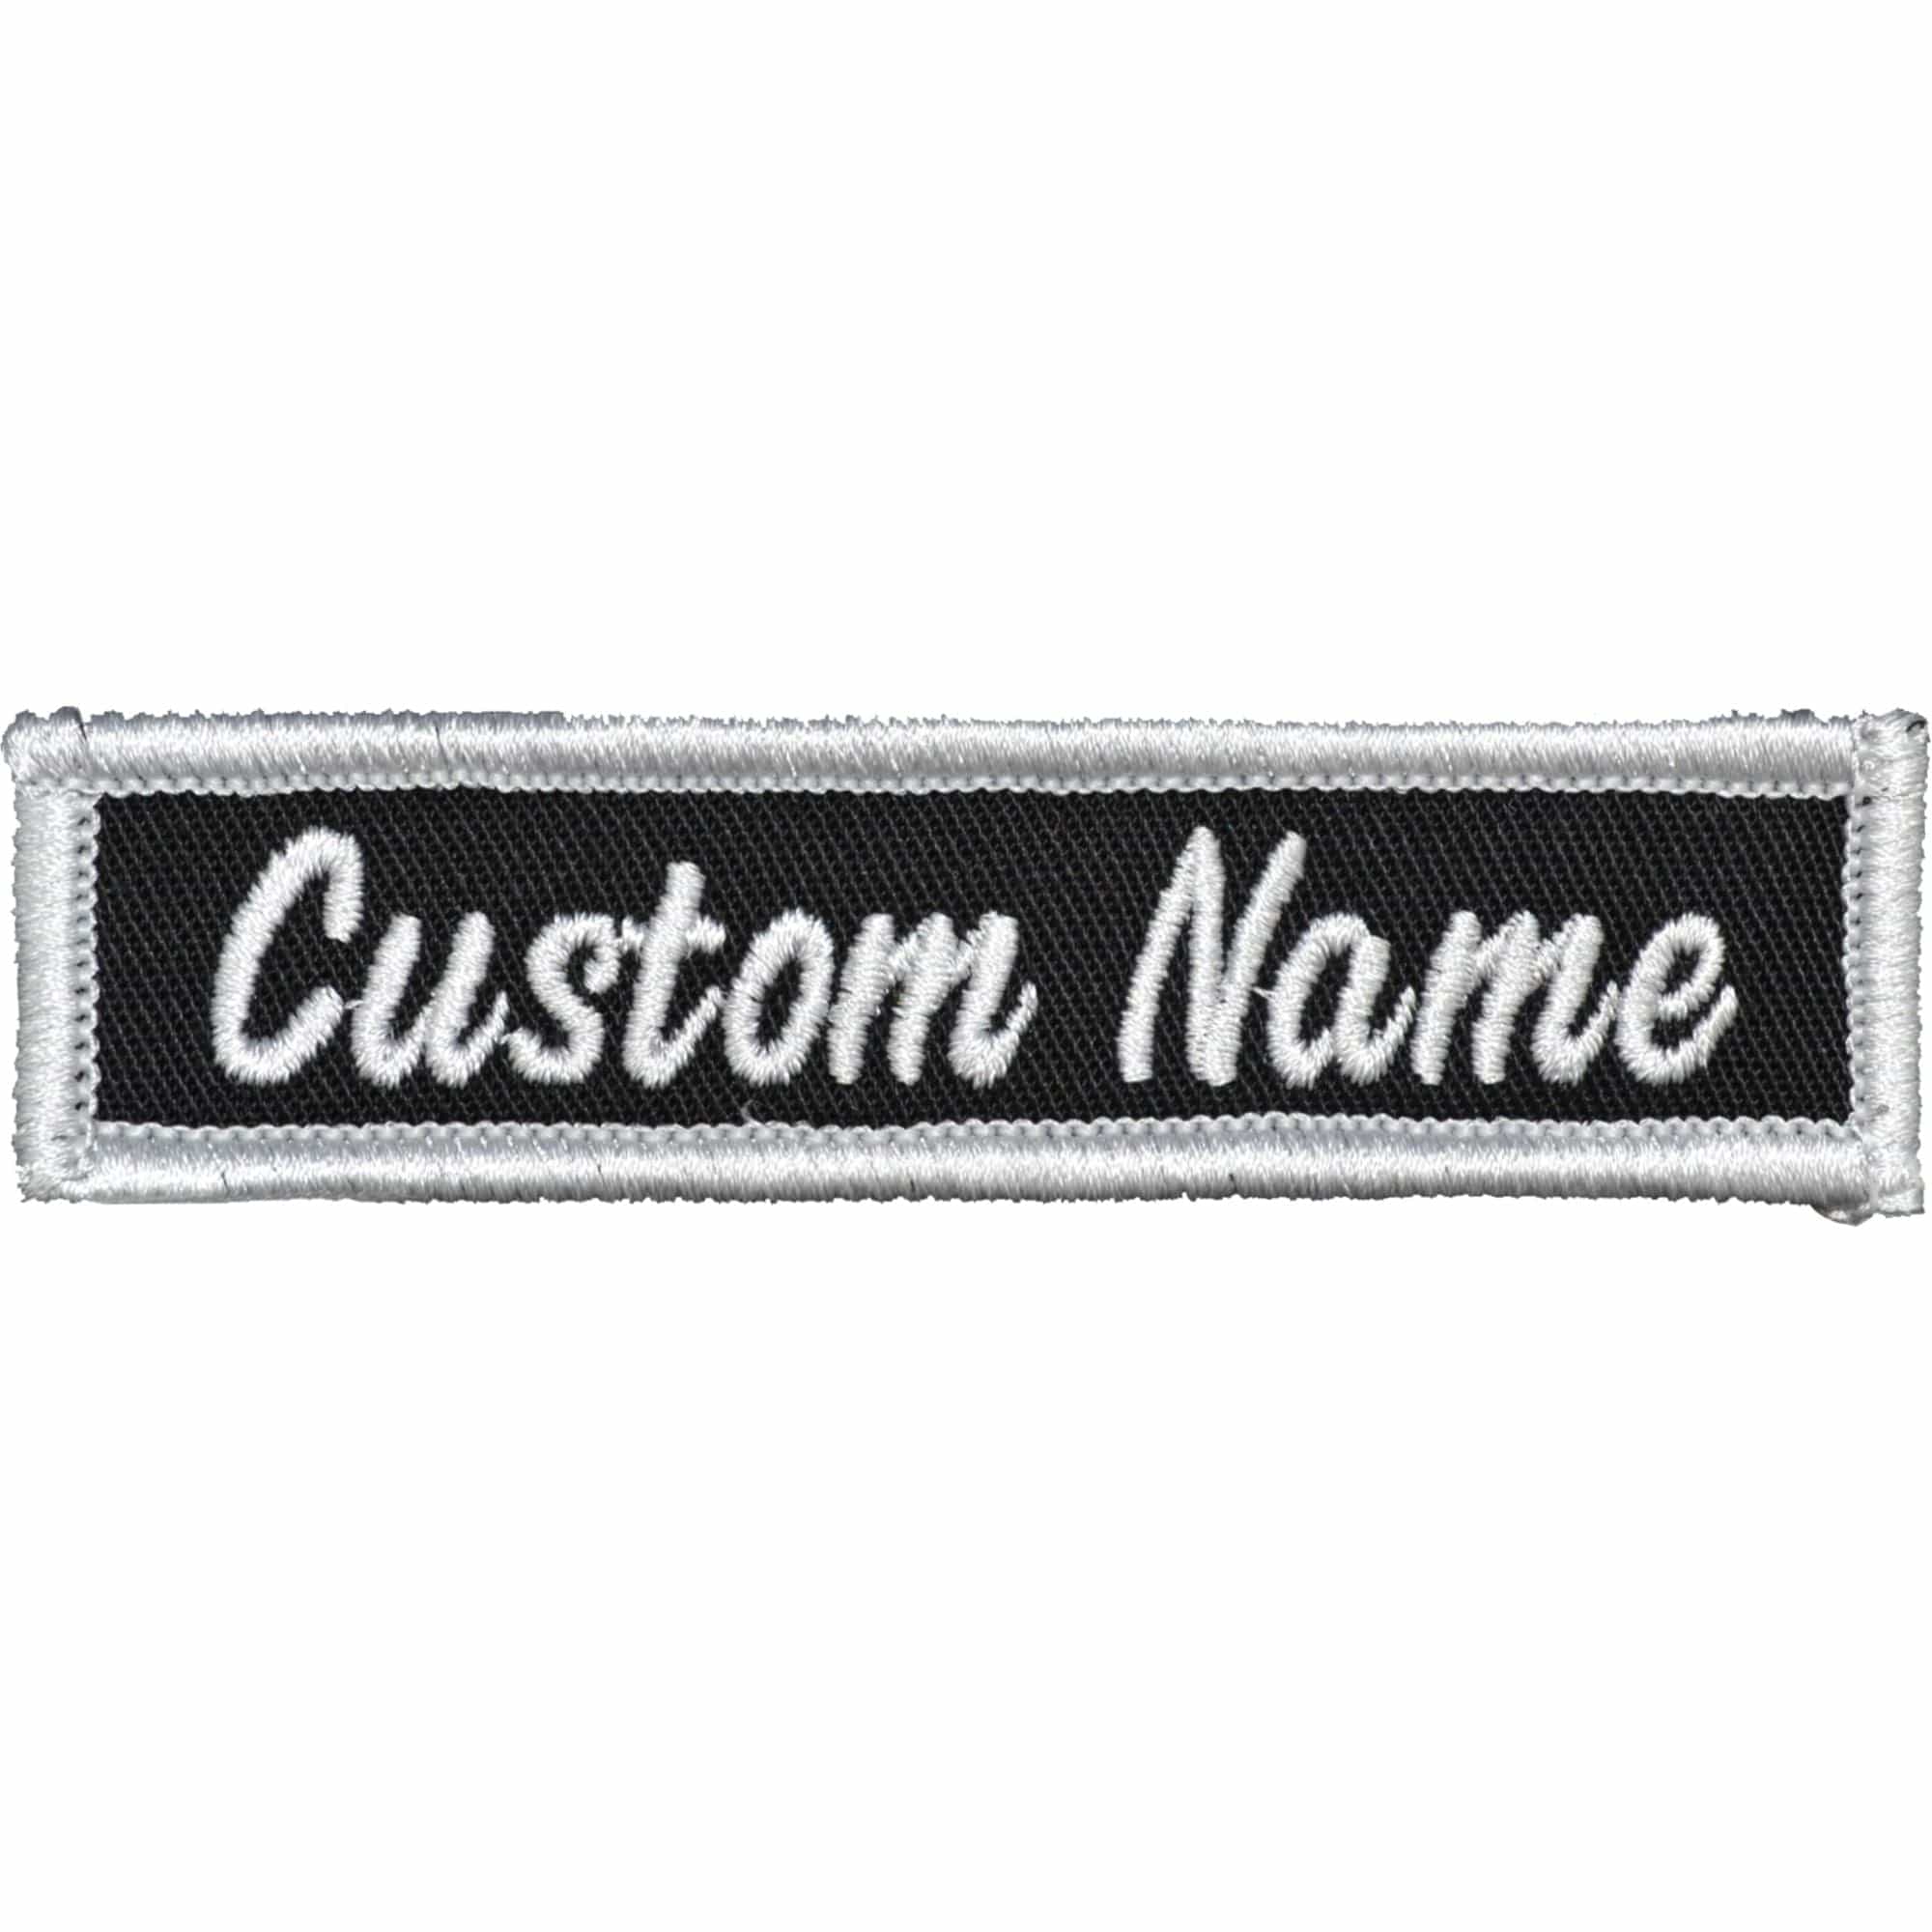 Tactical Gear Junkie Patches Custom Biker Vest Patch Name Strip - 1x3.75 - Sew On